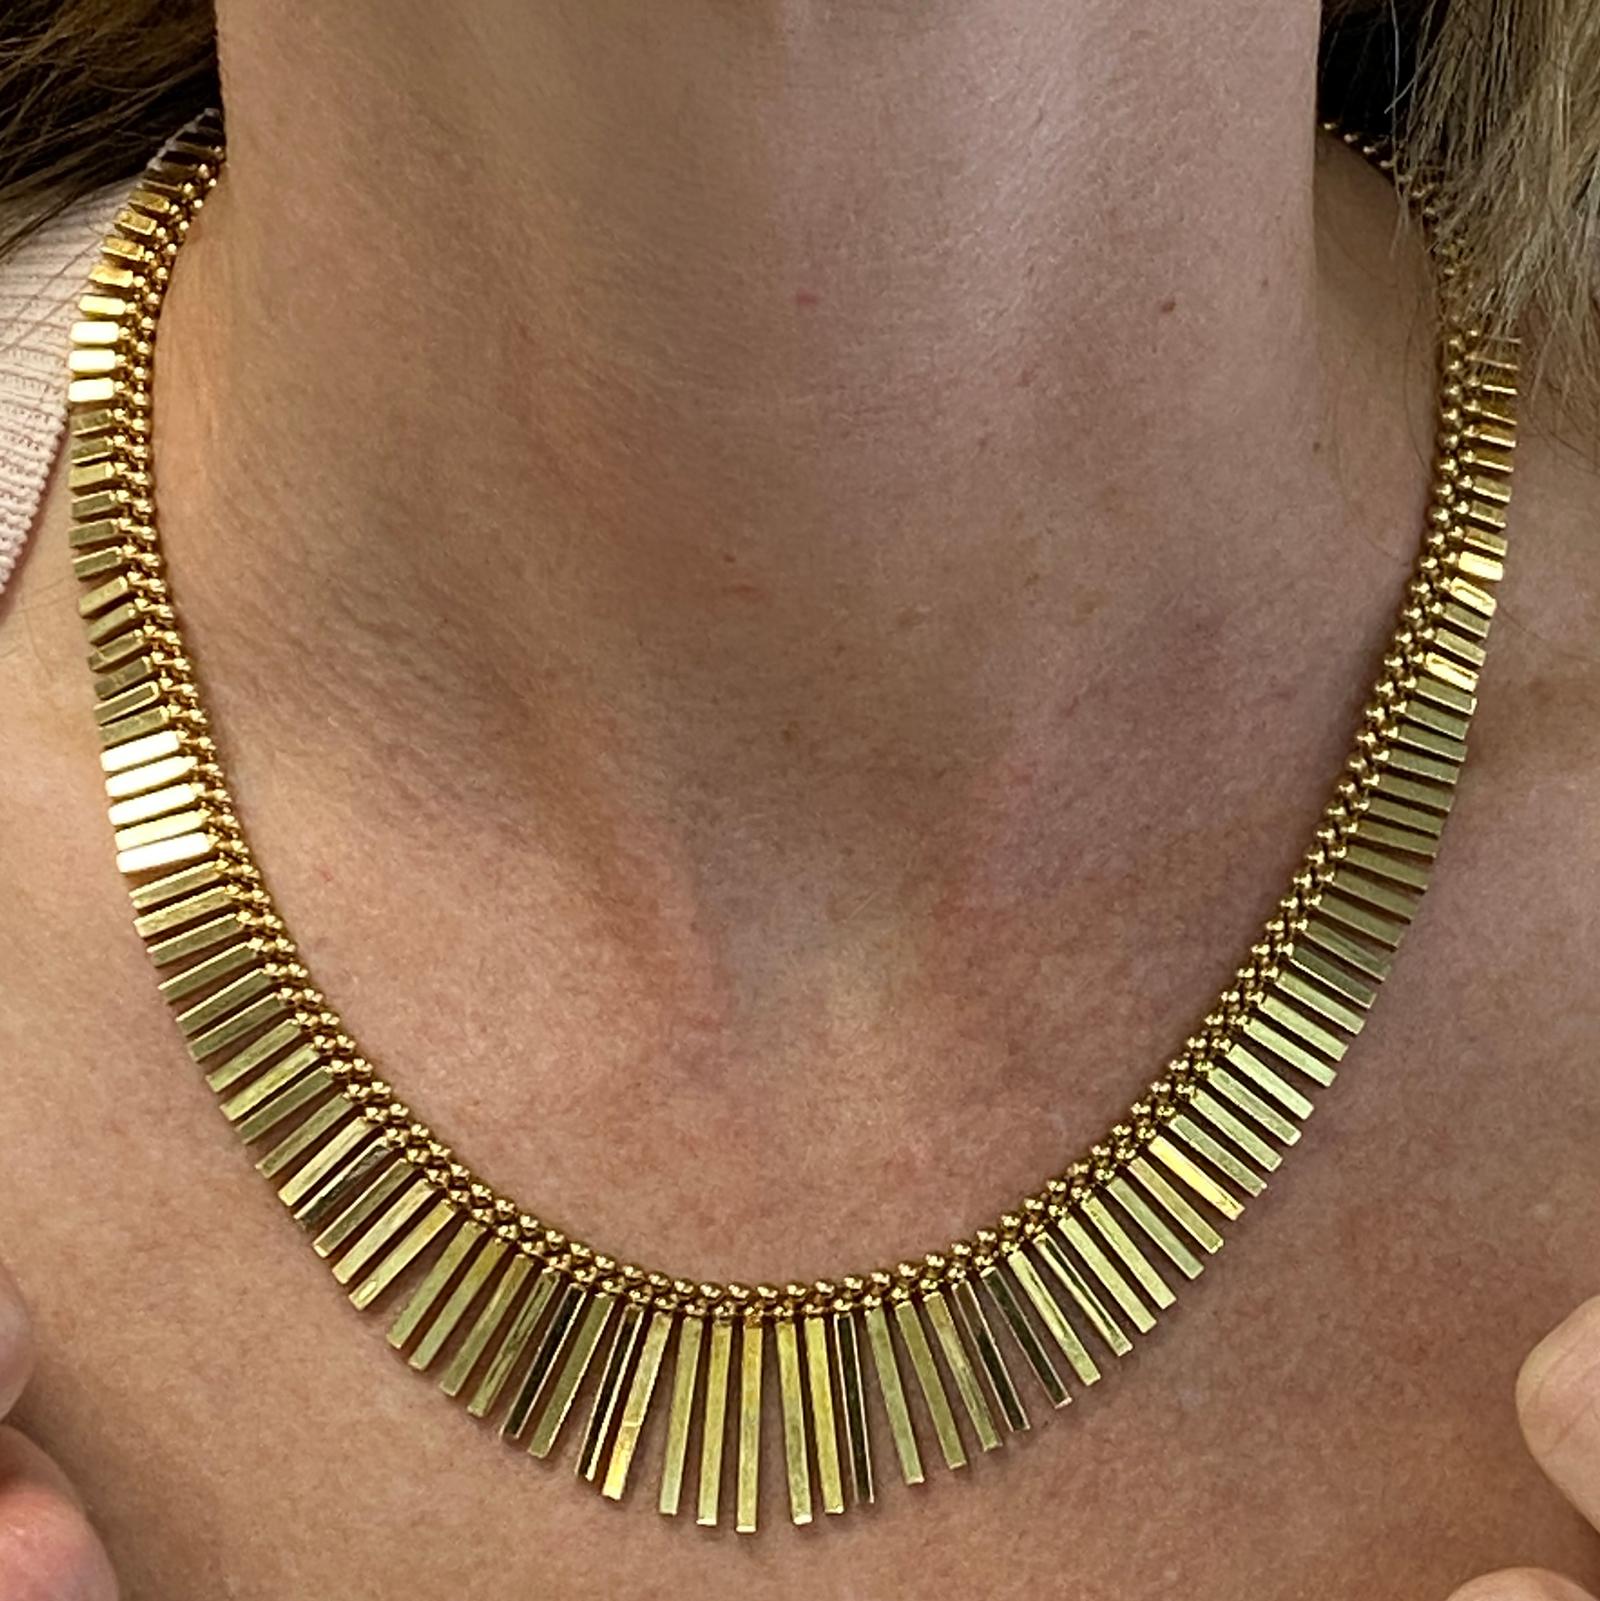 Vintage Cleopatra necklace fashioned in 14 karat yellow gold. The beautifully kept high polish necklace features drops measuring .25- 1.00 inches, the necklace measures 16.5 inches in length. 